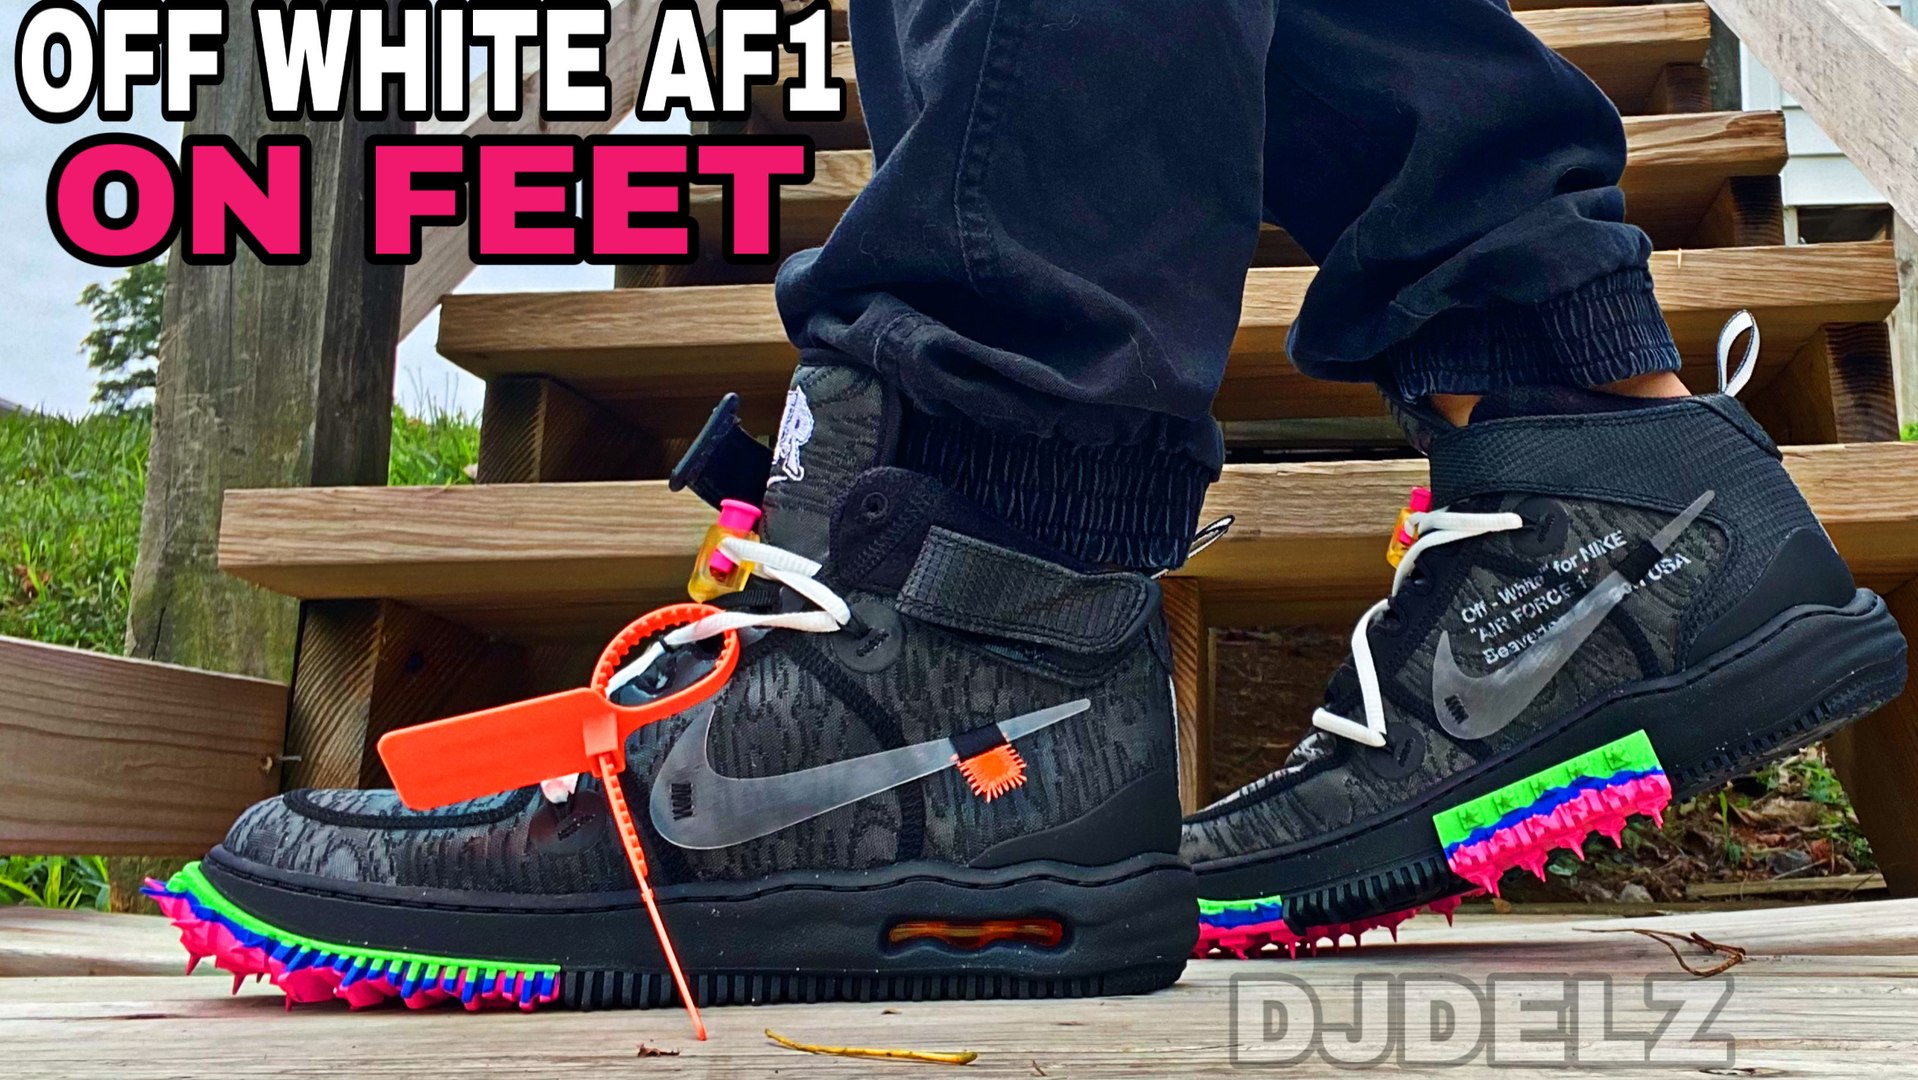 Off white nike Air Force 1 mid block noir sneaker review on feet - video  Dailymotion